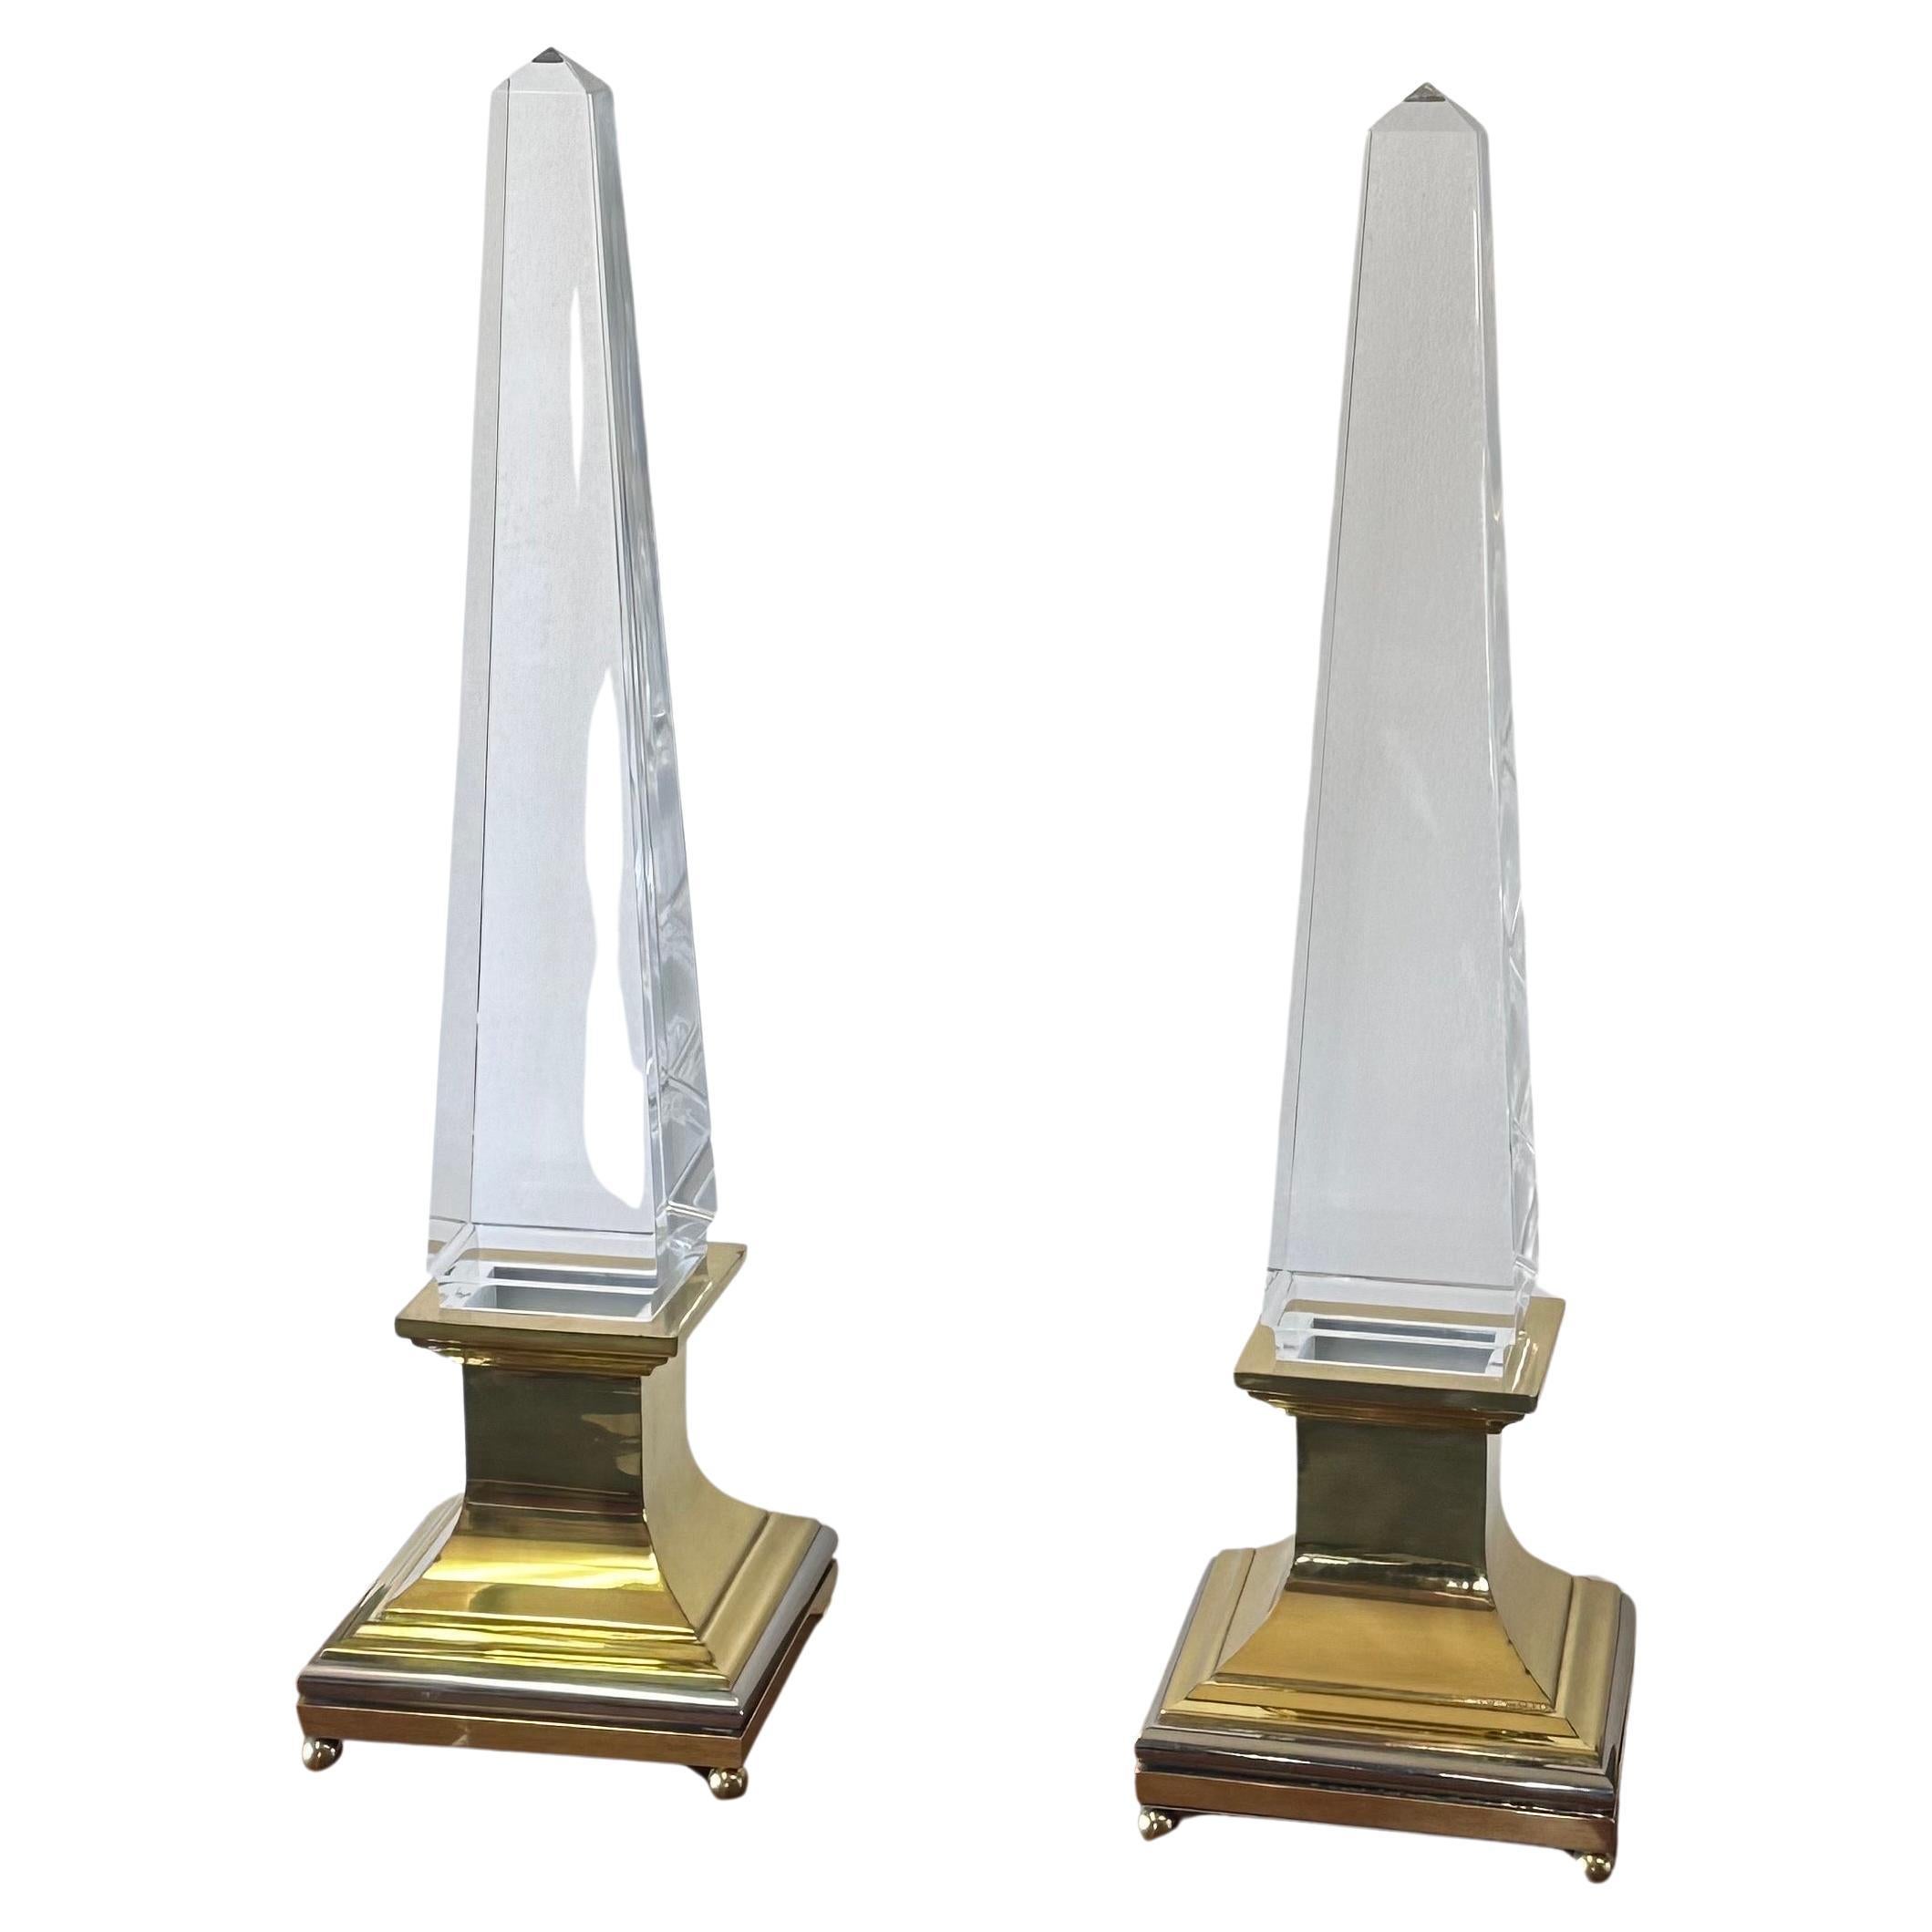 Pair of Lucite and Brass Obelisk Table Lamps by Sandro Petti for Maison Jansen For Sale 12